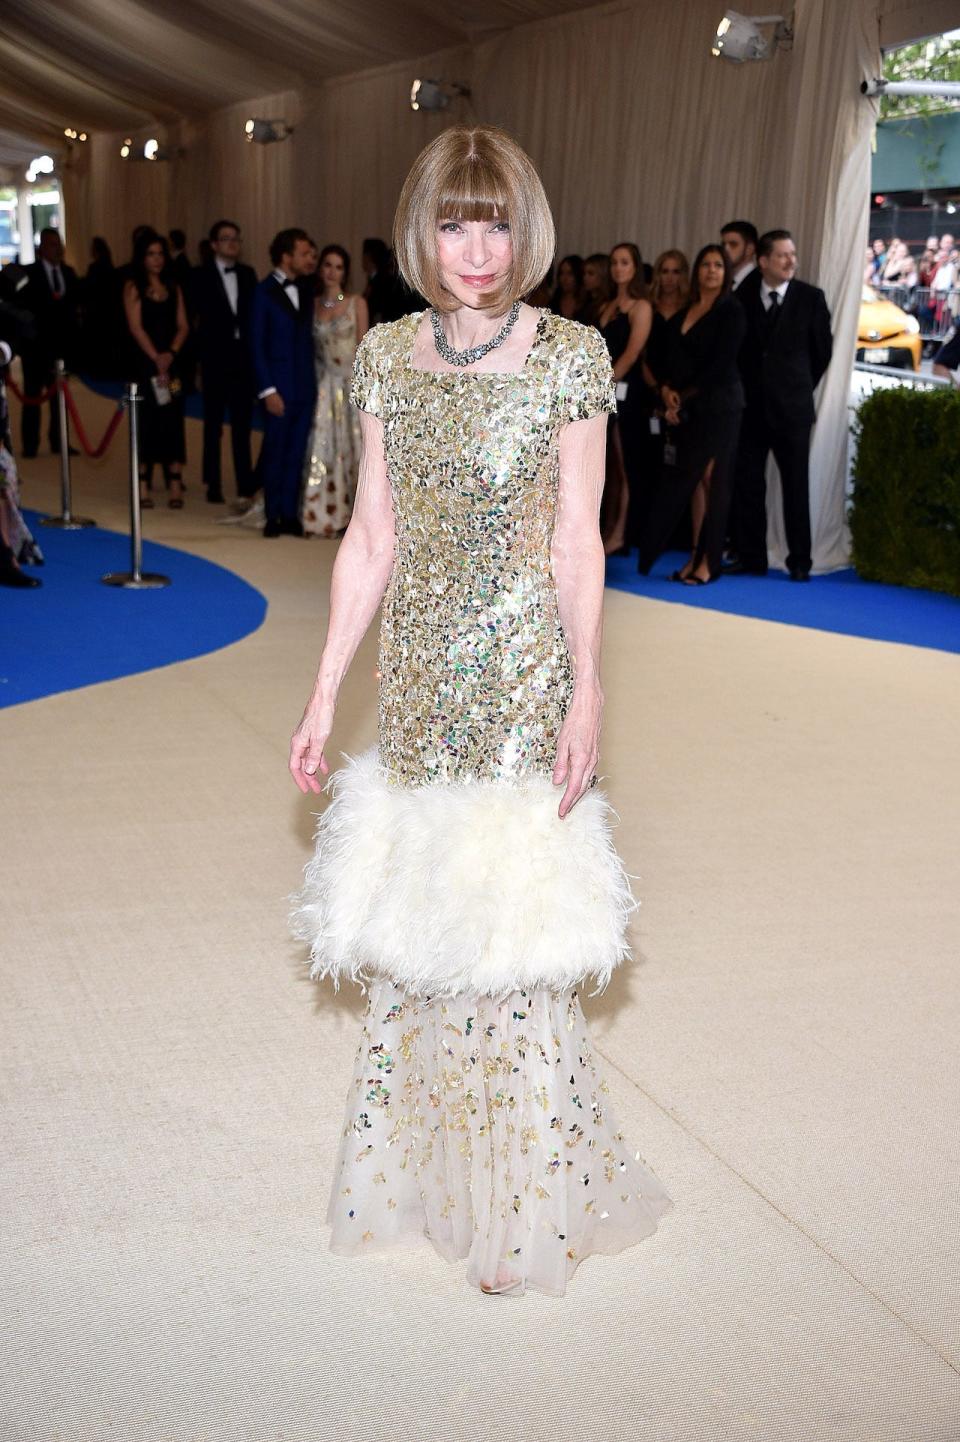 Anna Wintour at the 2017 Met Gala.